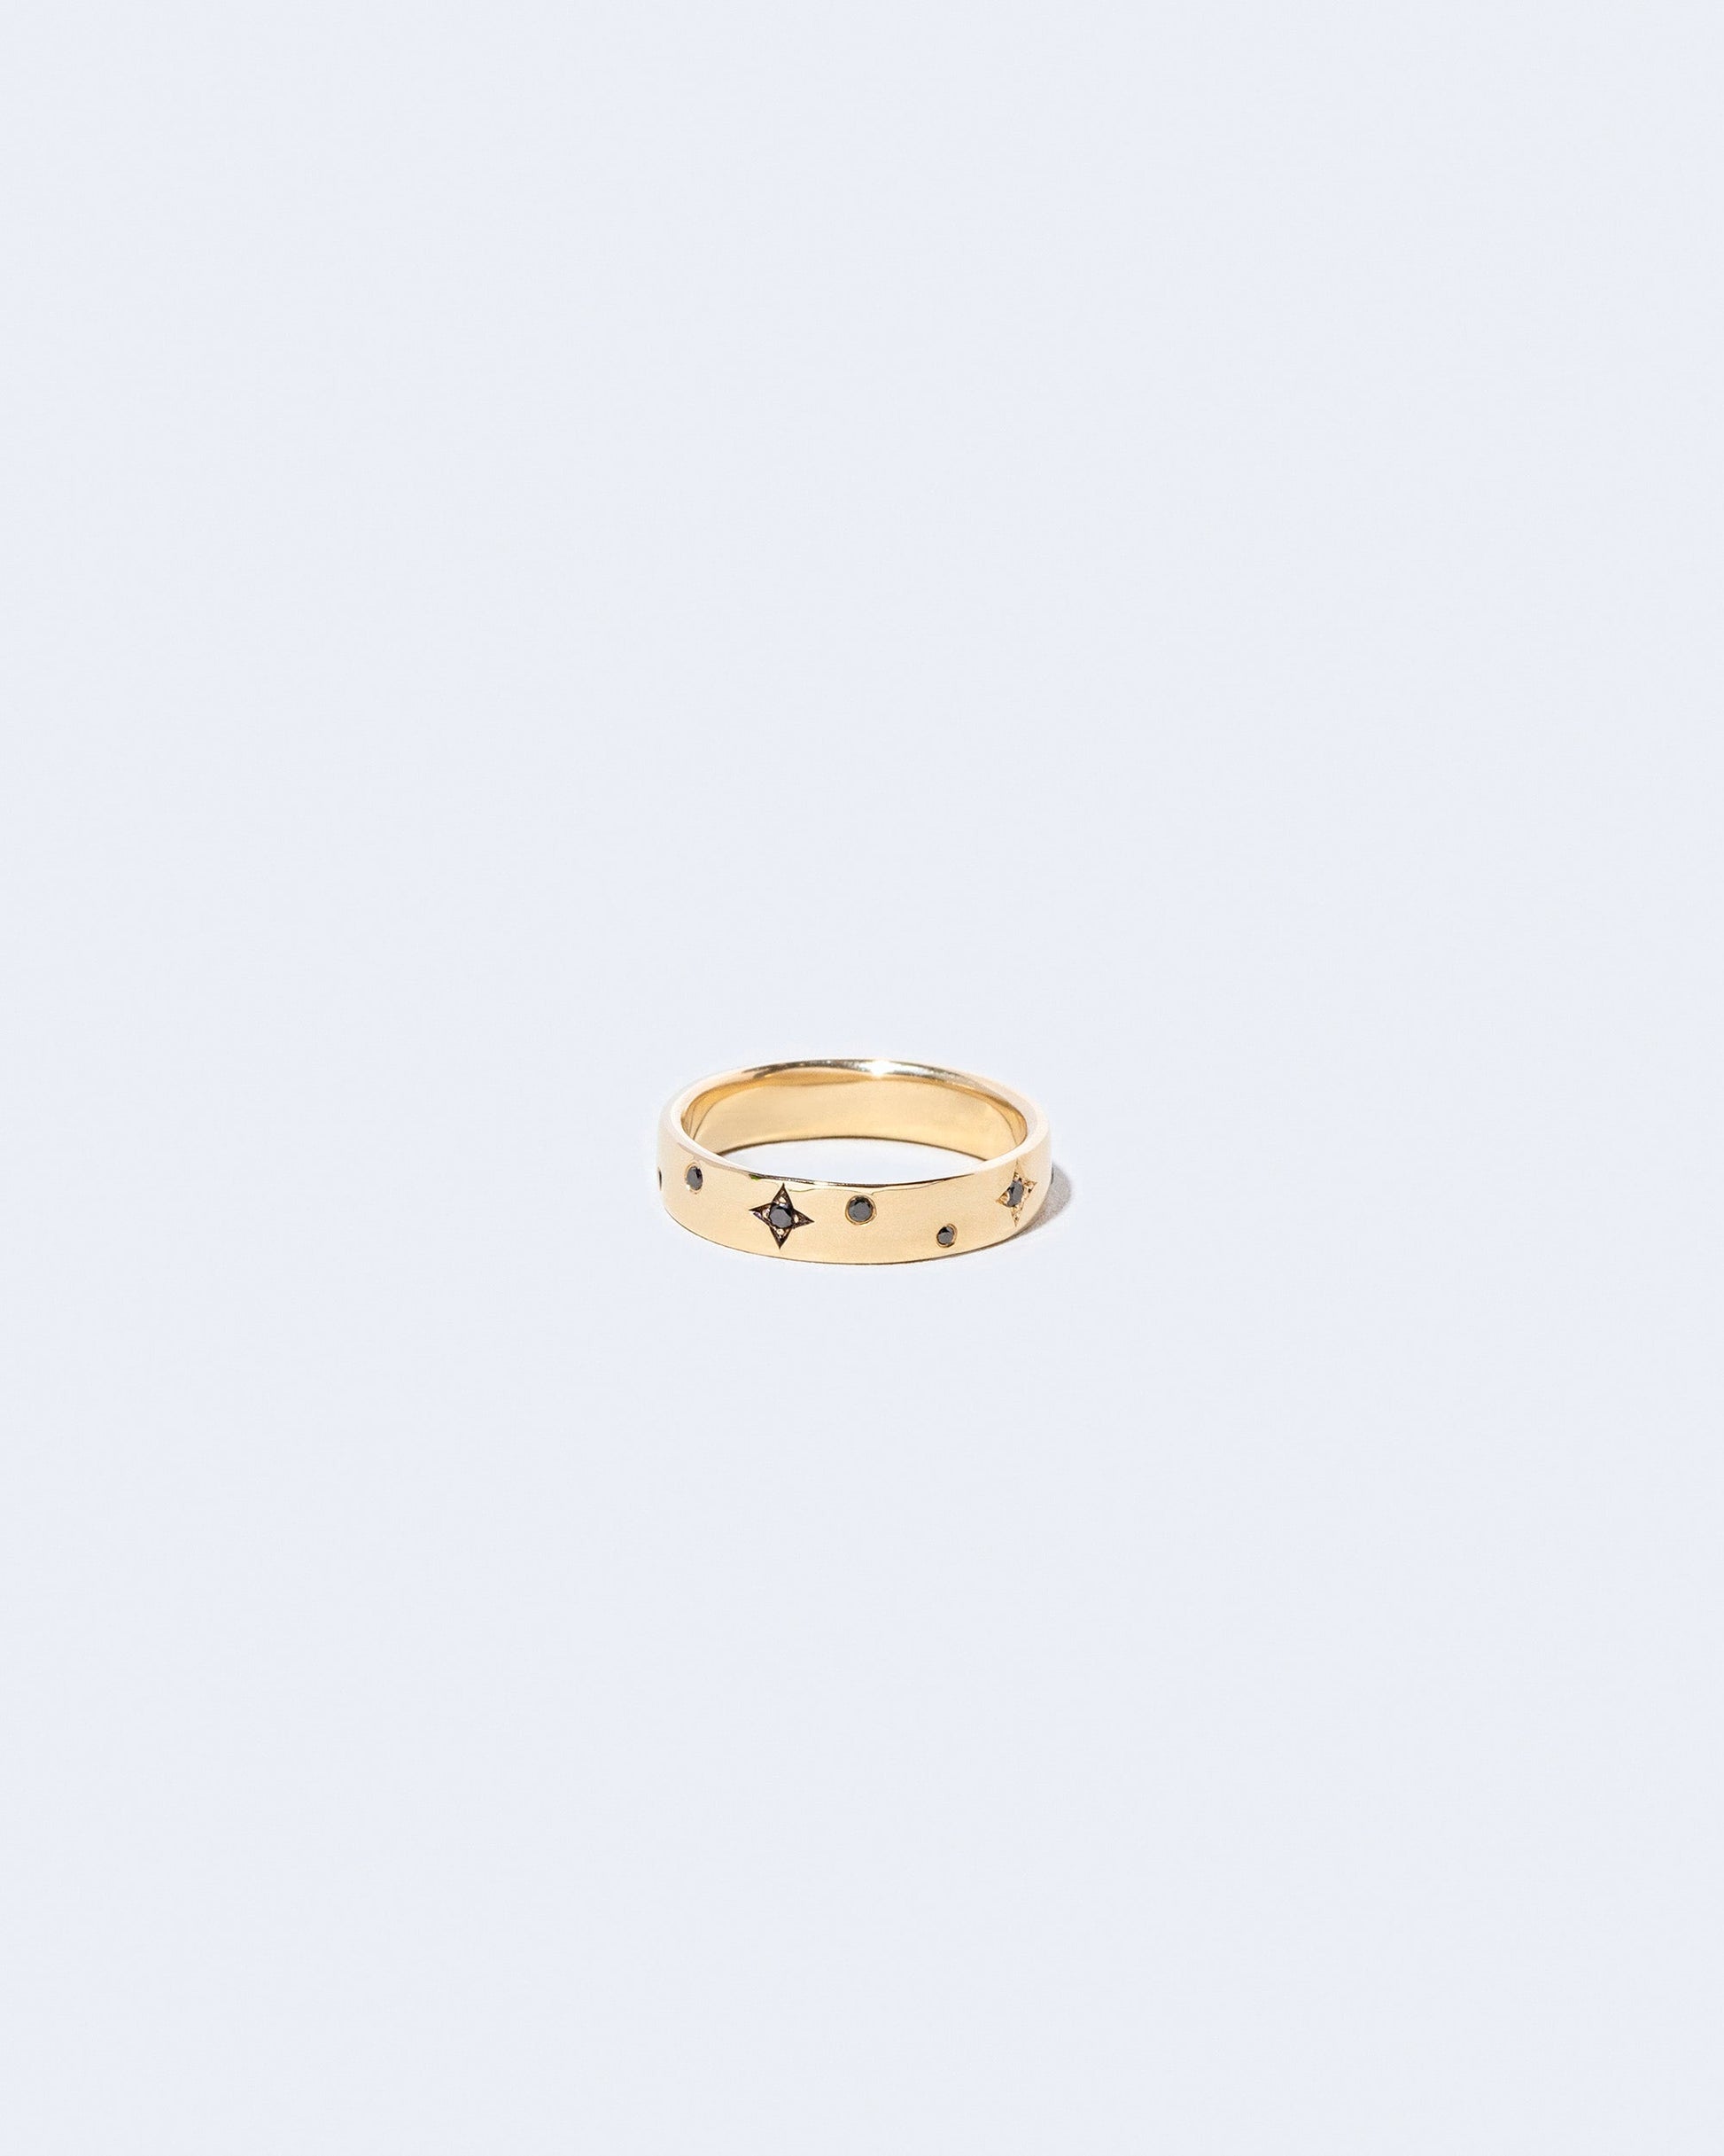 Gold 4mm Square Wire Band with Little Array Black Diamonds added on light color background.